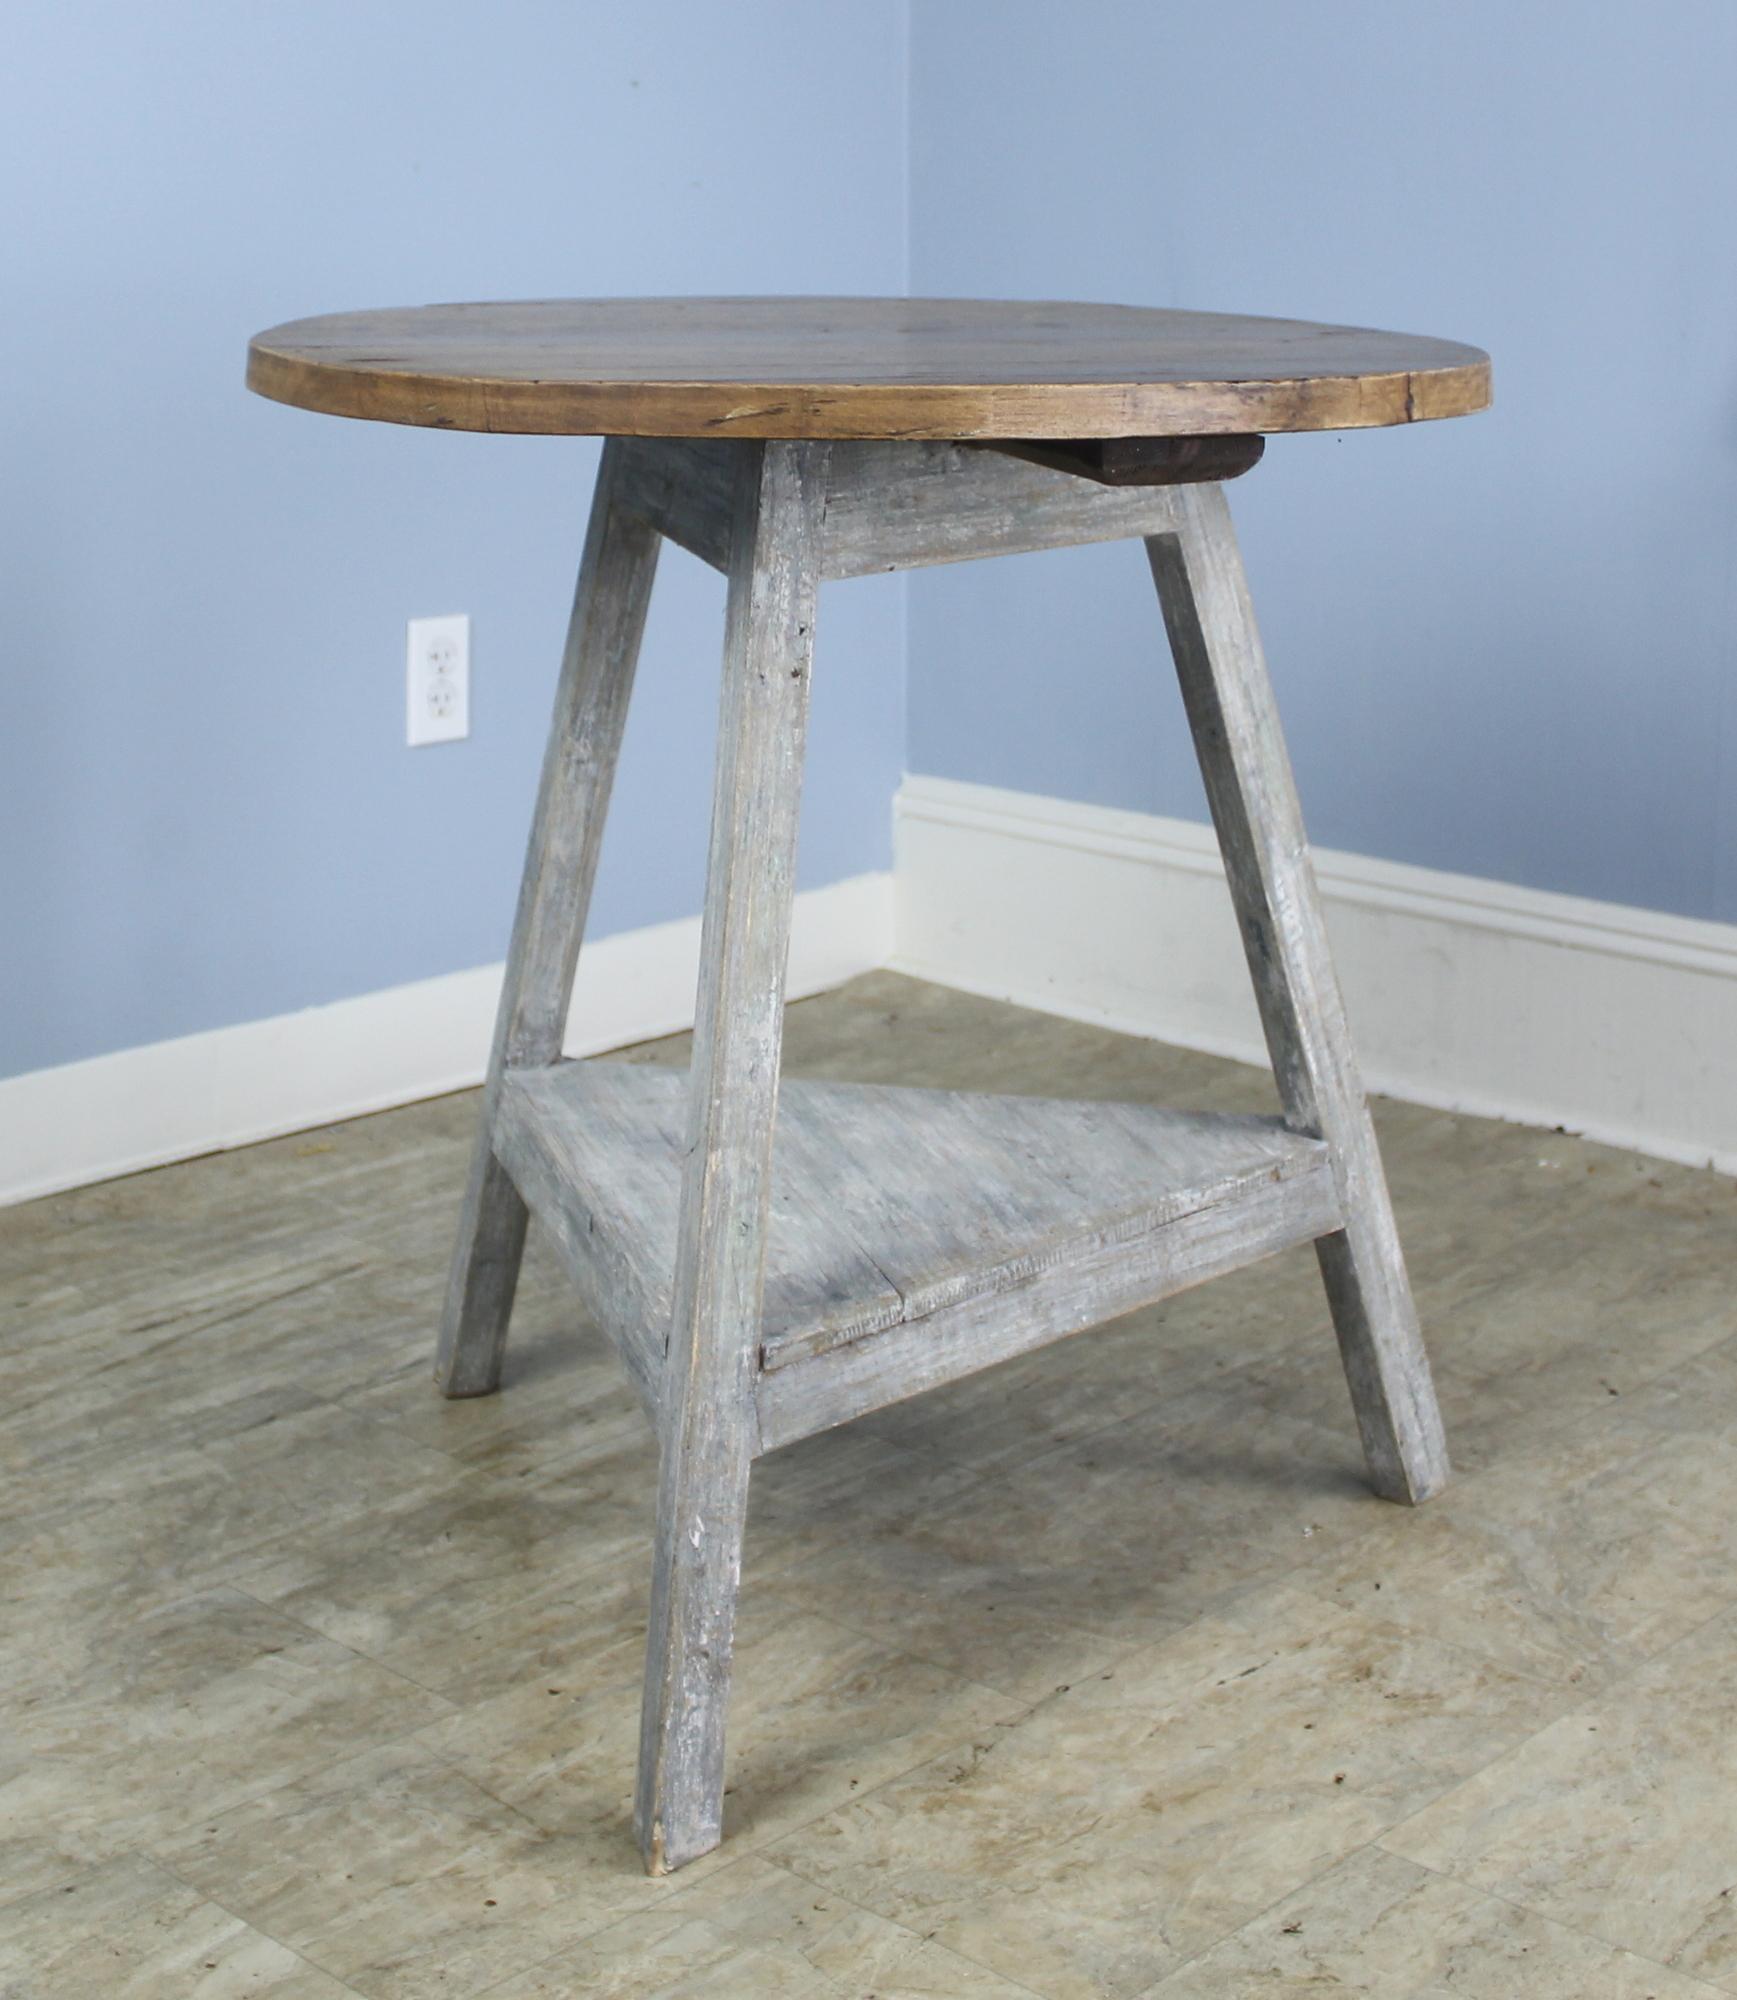 An antique Welsh cricket table. The base has been newly painted for a distressed look, and the top is a honey pine, both rich in wear and patina. Makes a terrific lamp table.